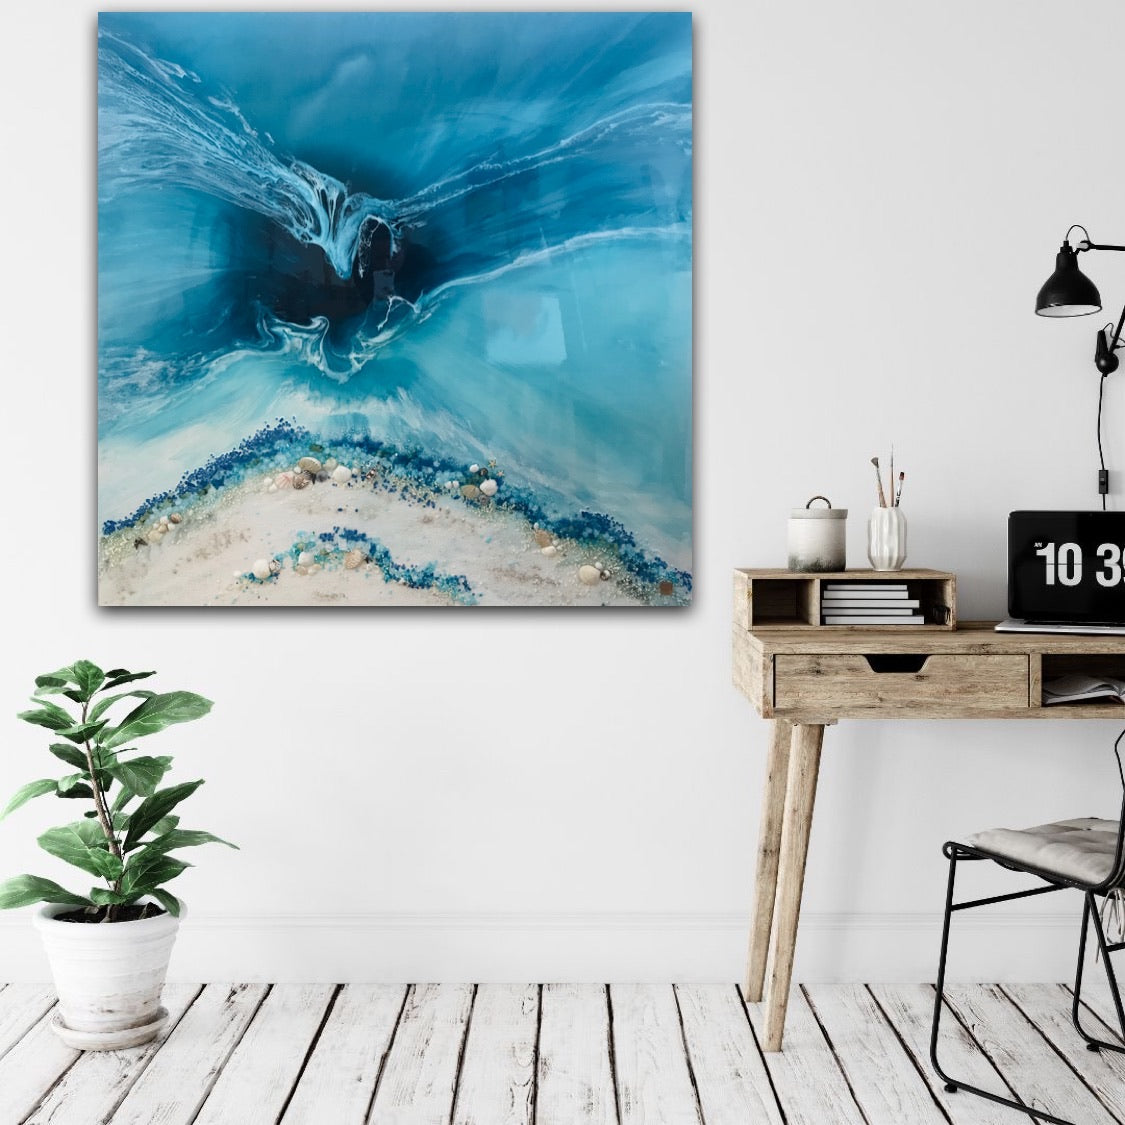 TEAL AND WHITE. Crystal clear. Ocean Original Artwork. Antuanelle 3 Clear. Artwork with Amazonite. 90x90cm